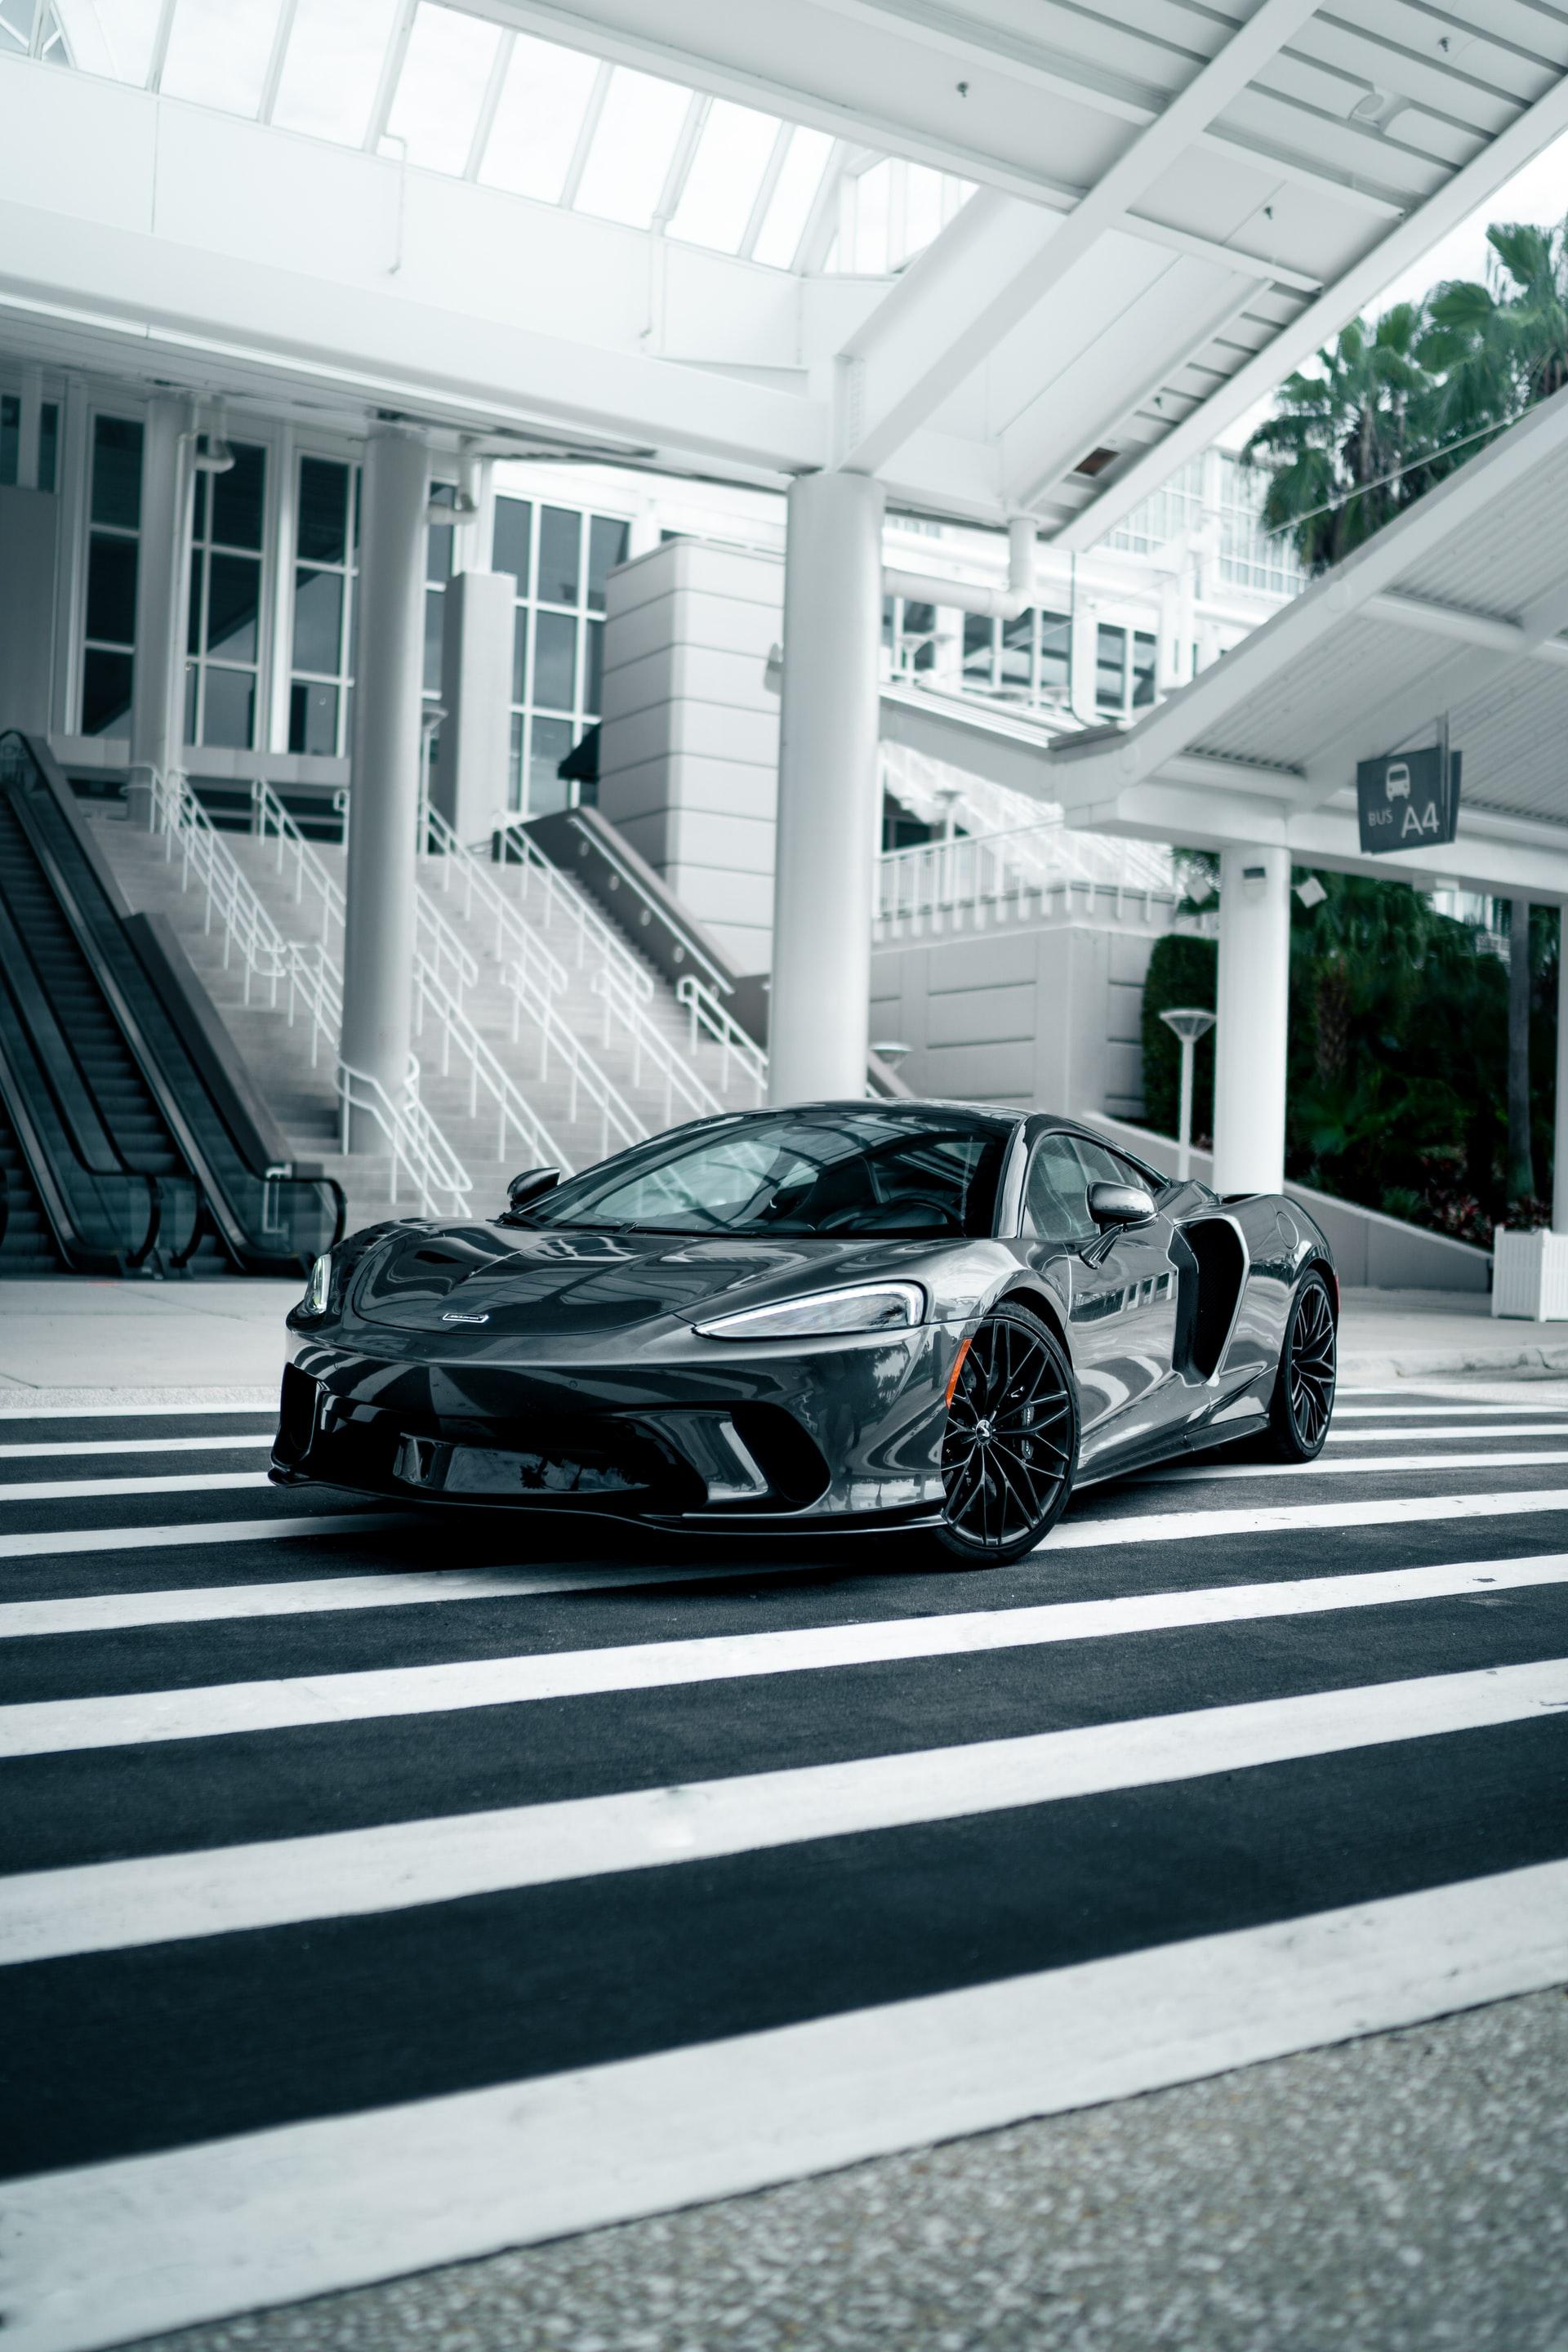 Black McLaren GT parked on a crosswalk in front of a white staircase